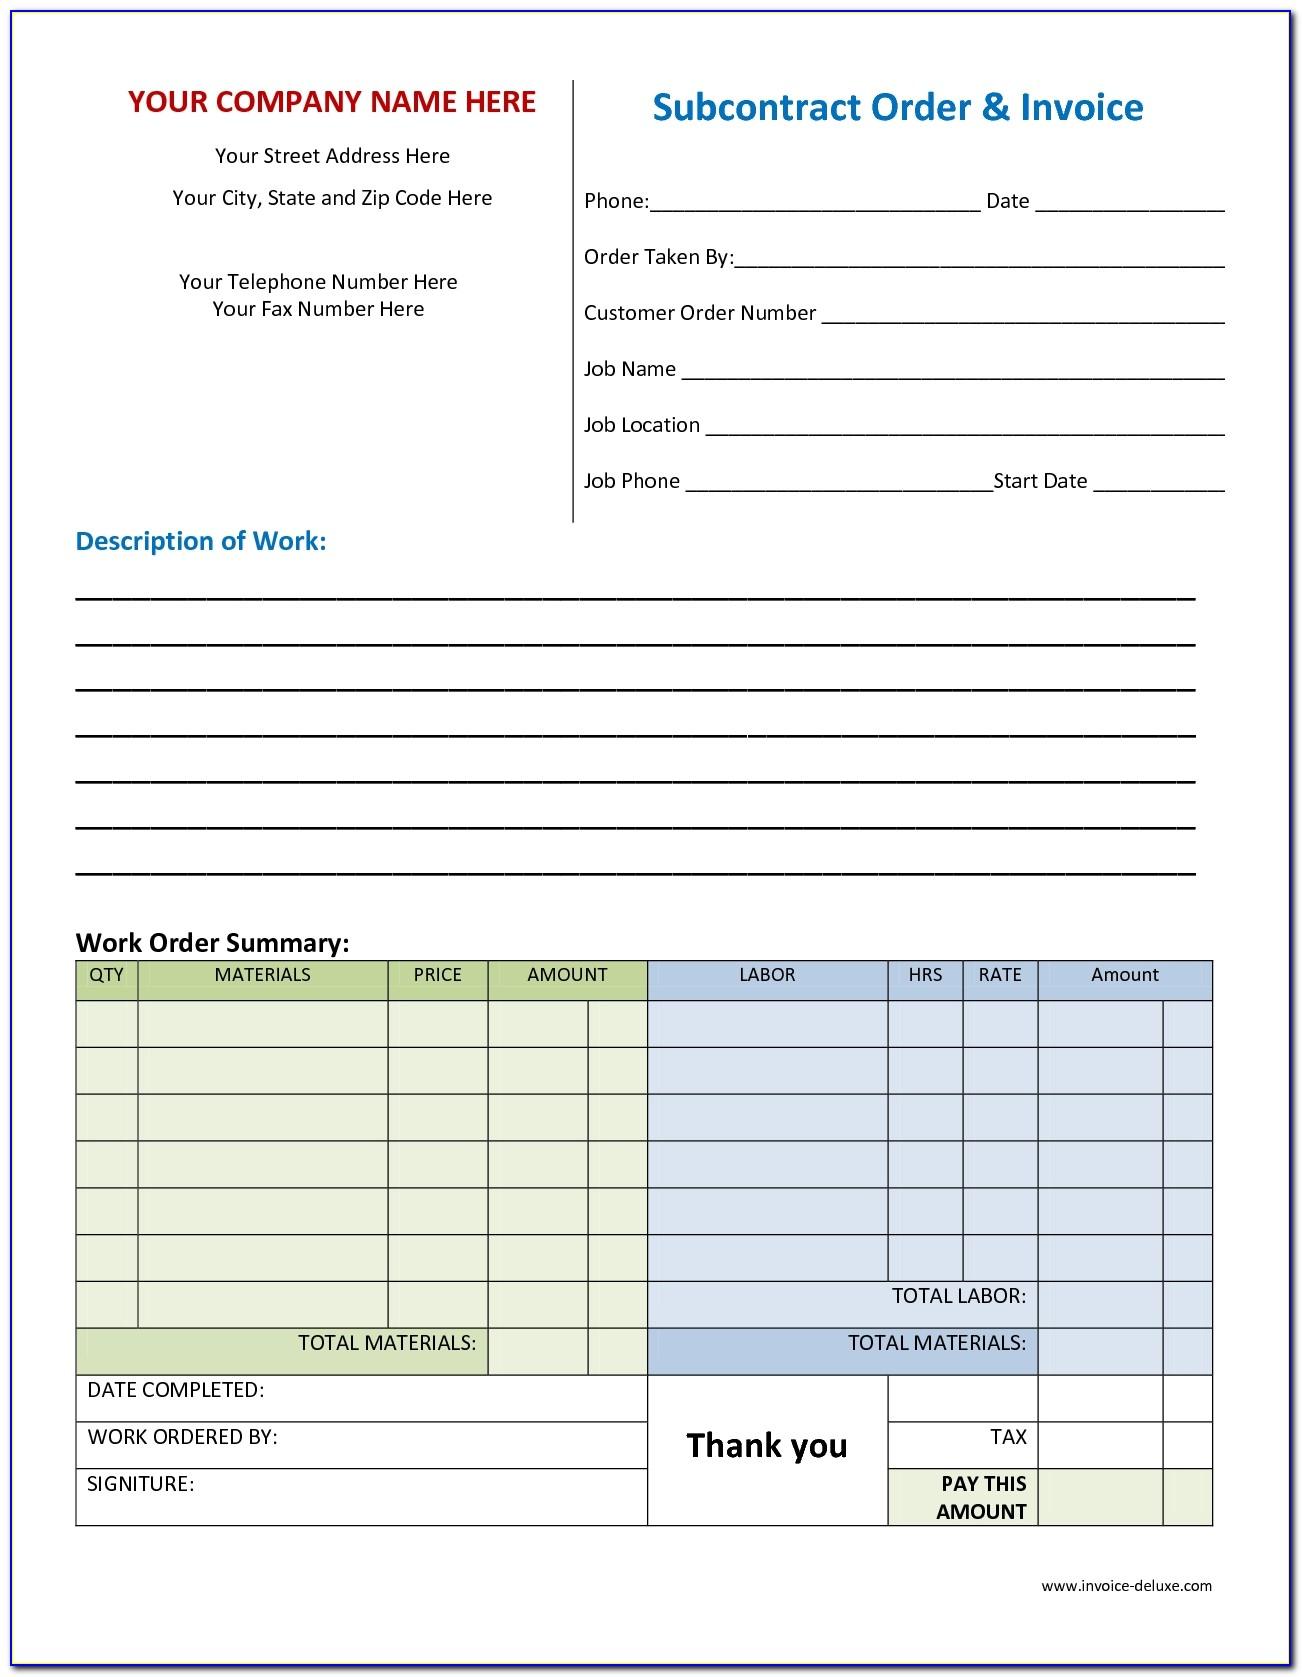 Work Order Invoice Forms